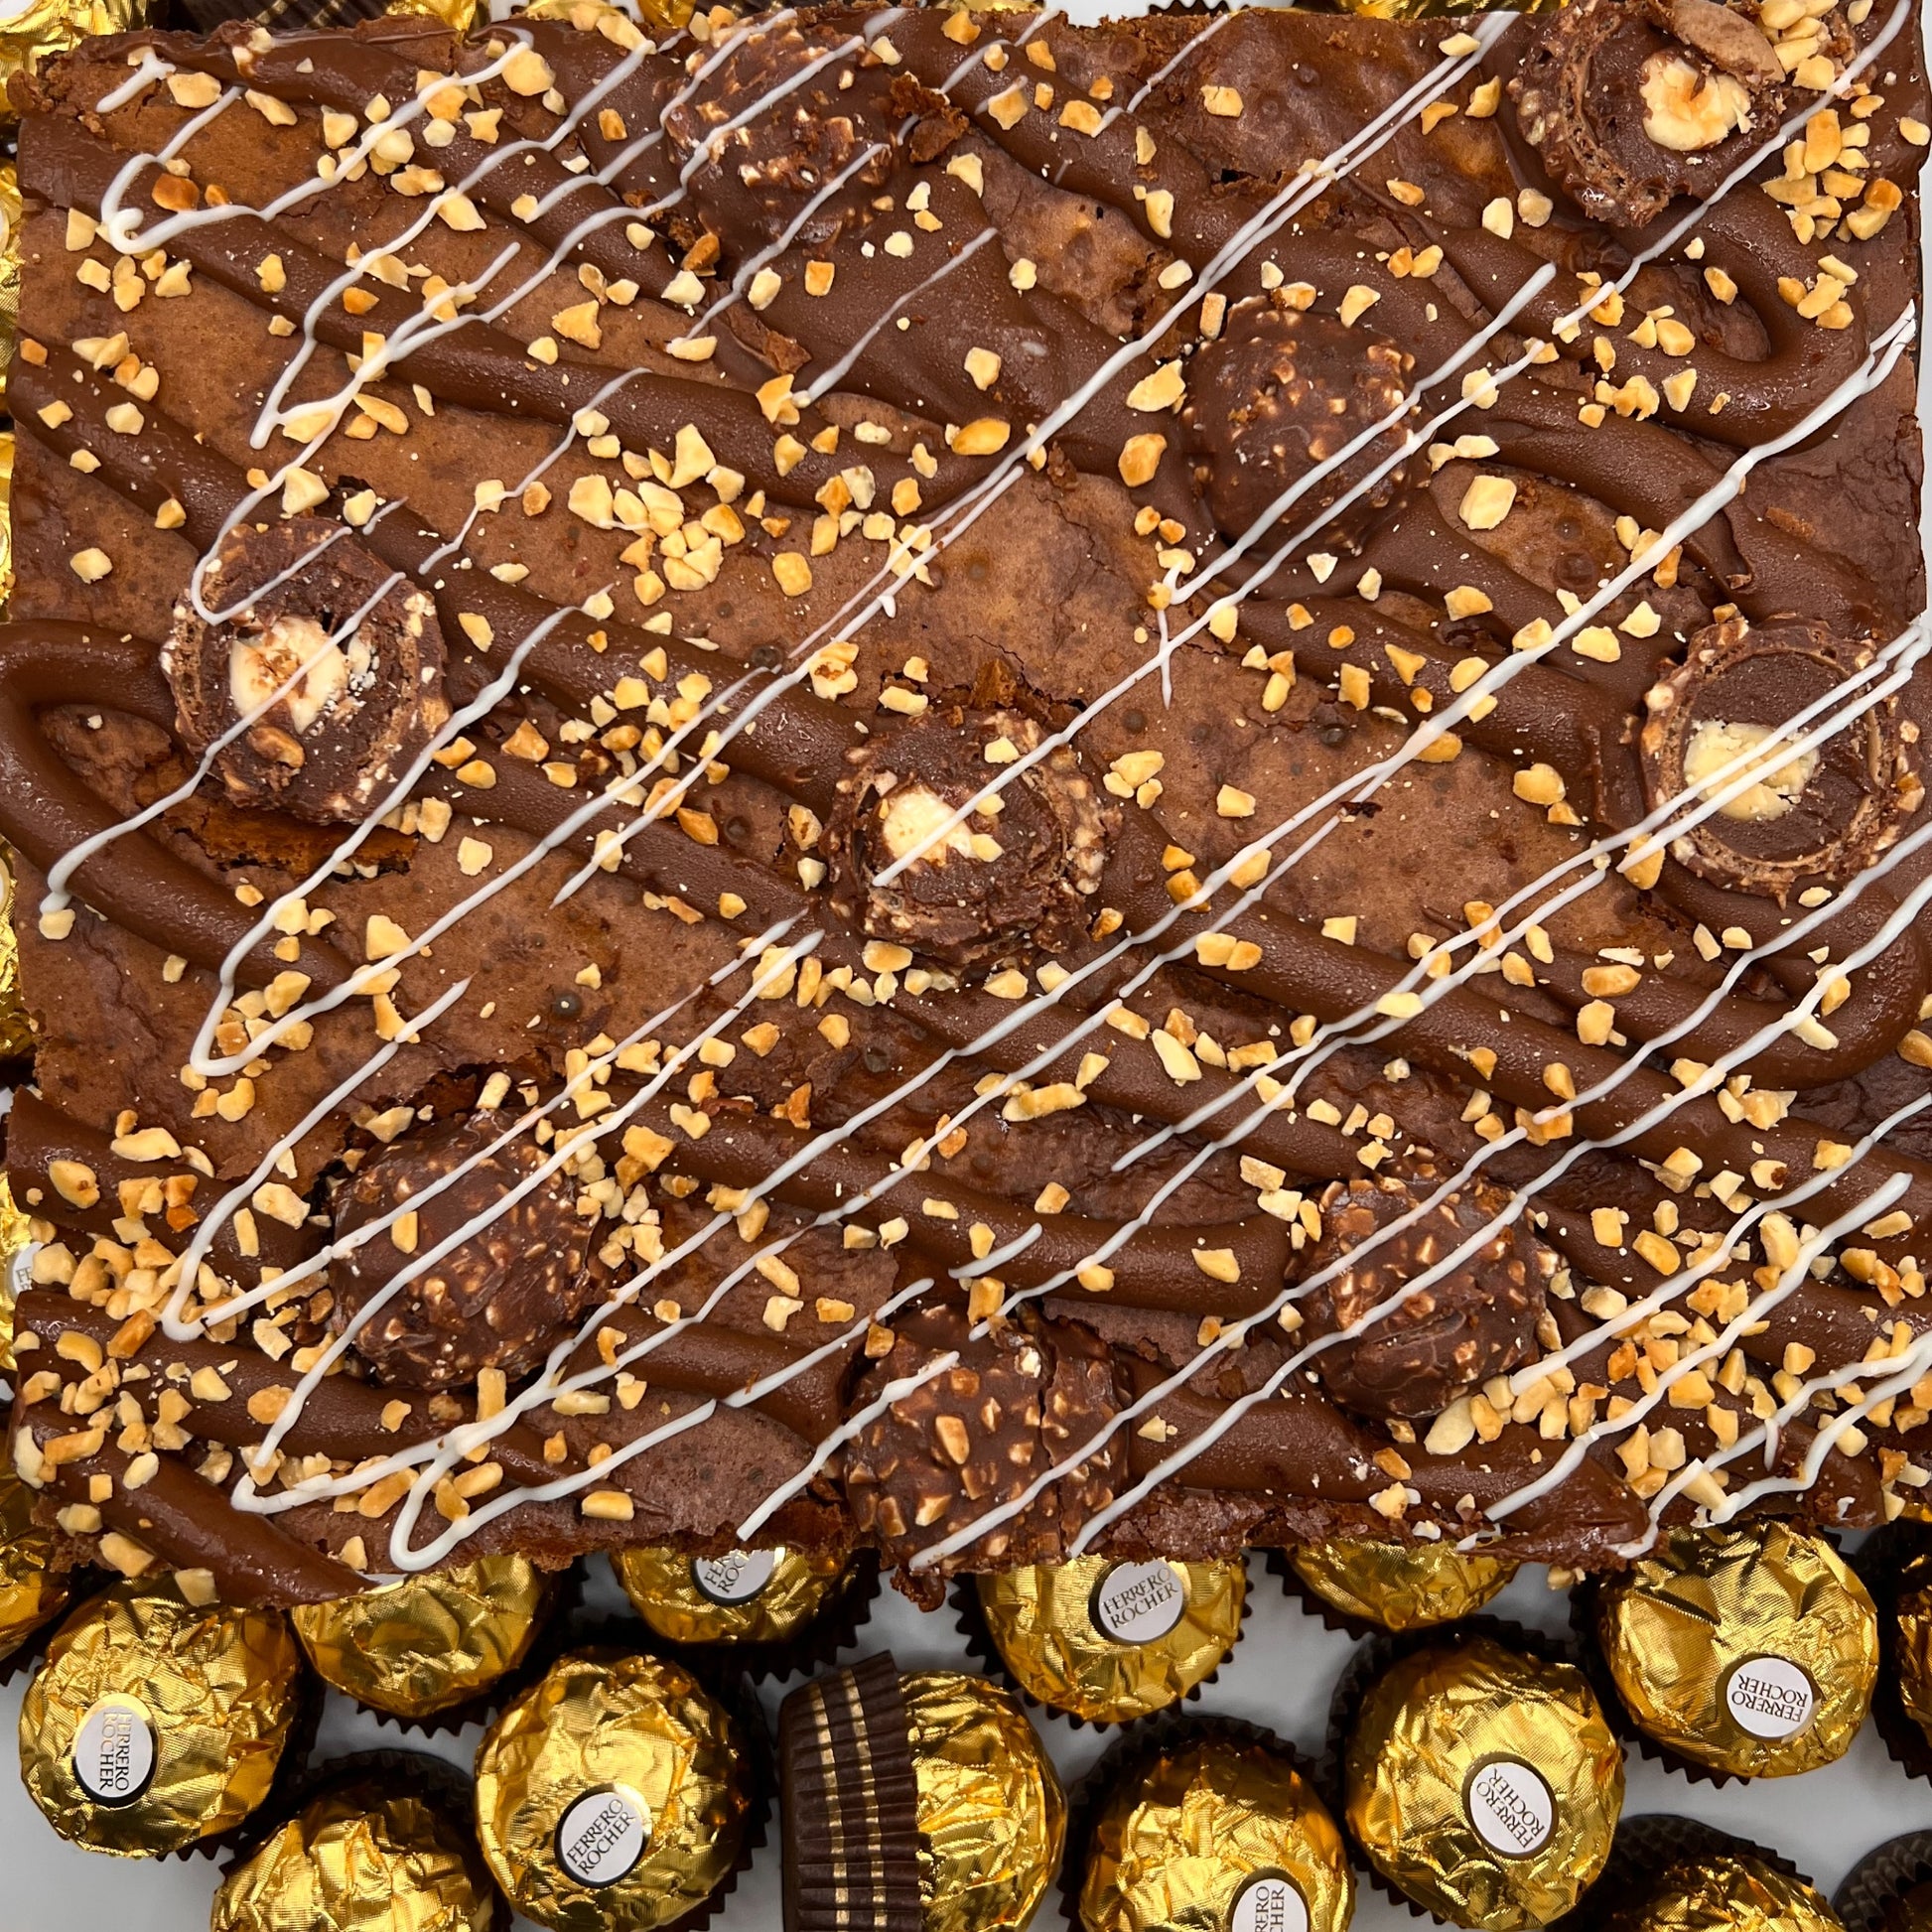 Indulgent Chocoholic Hazelnut Brownie with Nutella and Ferrero Rocher toppings, a treat for chocolate lovers